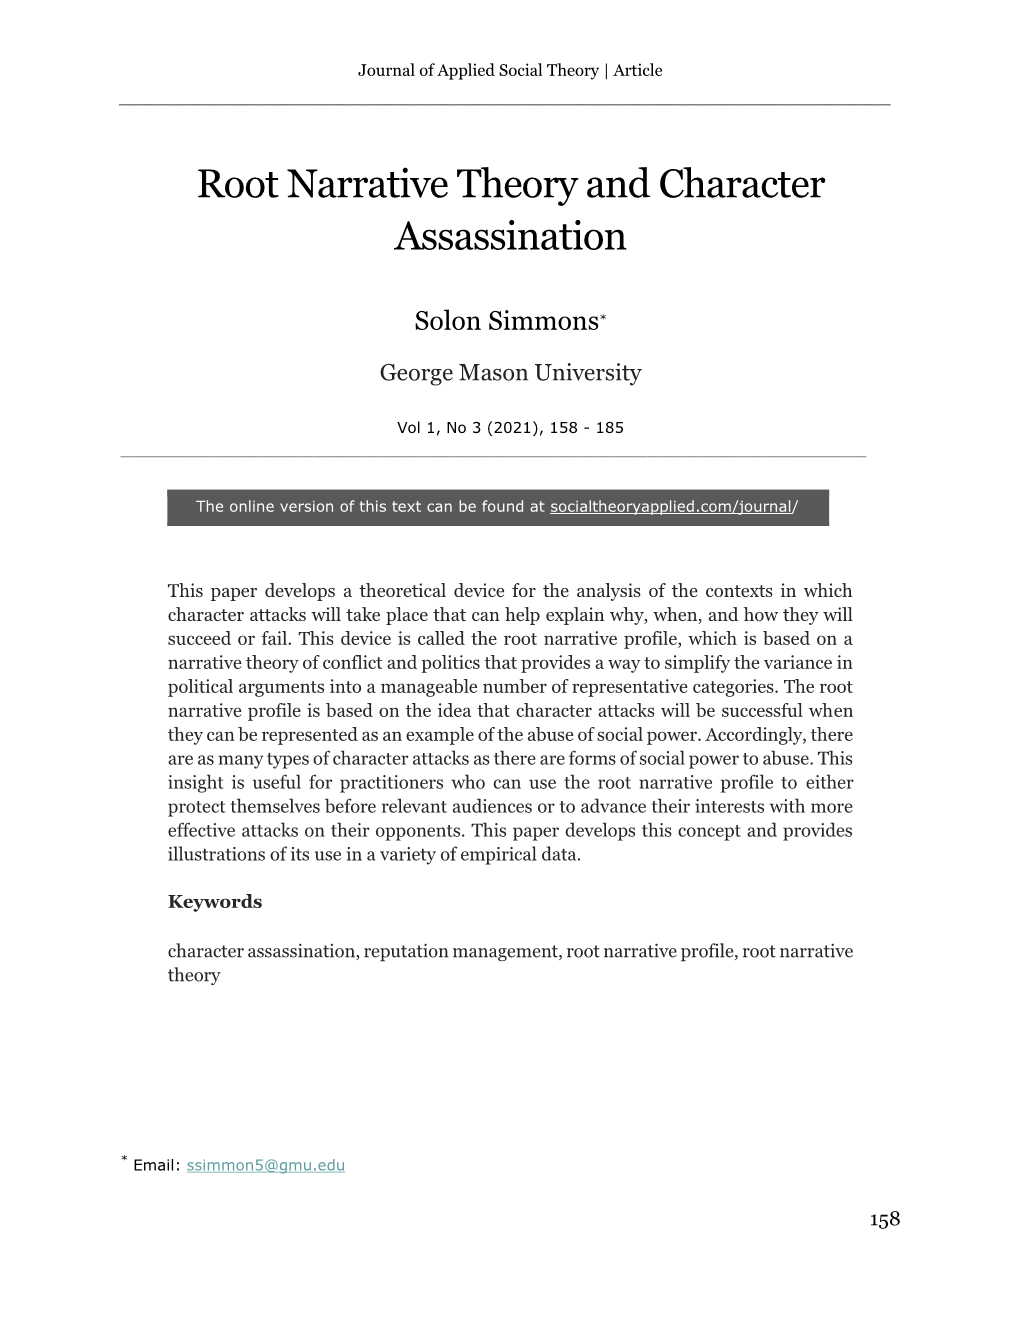 Root Narrative Theory and Character Assassination